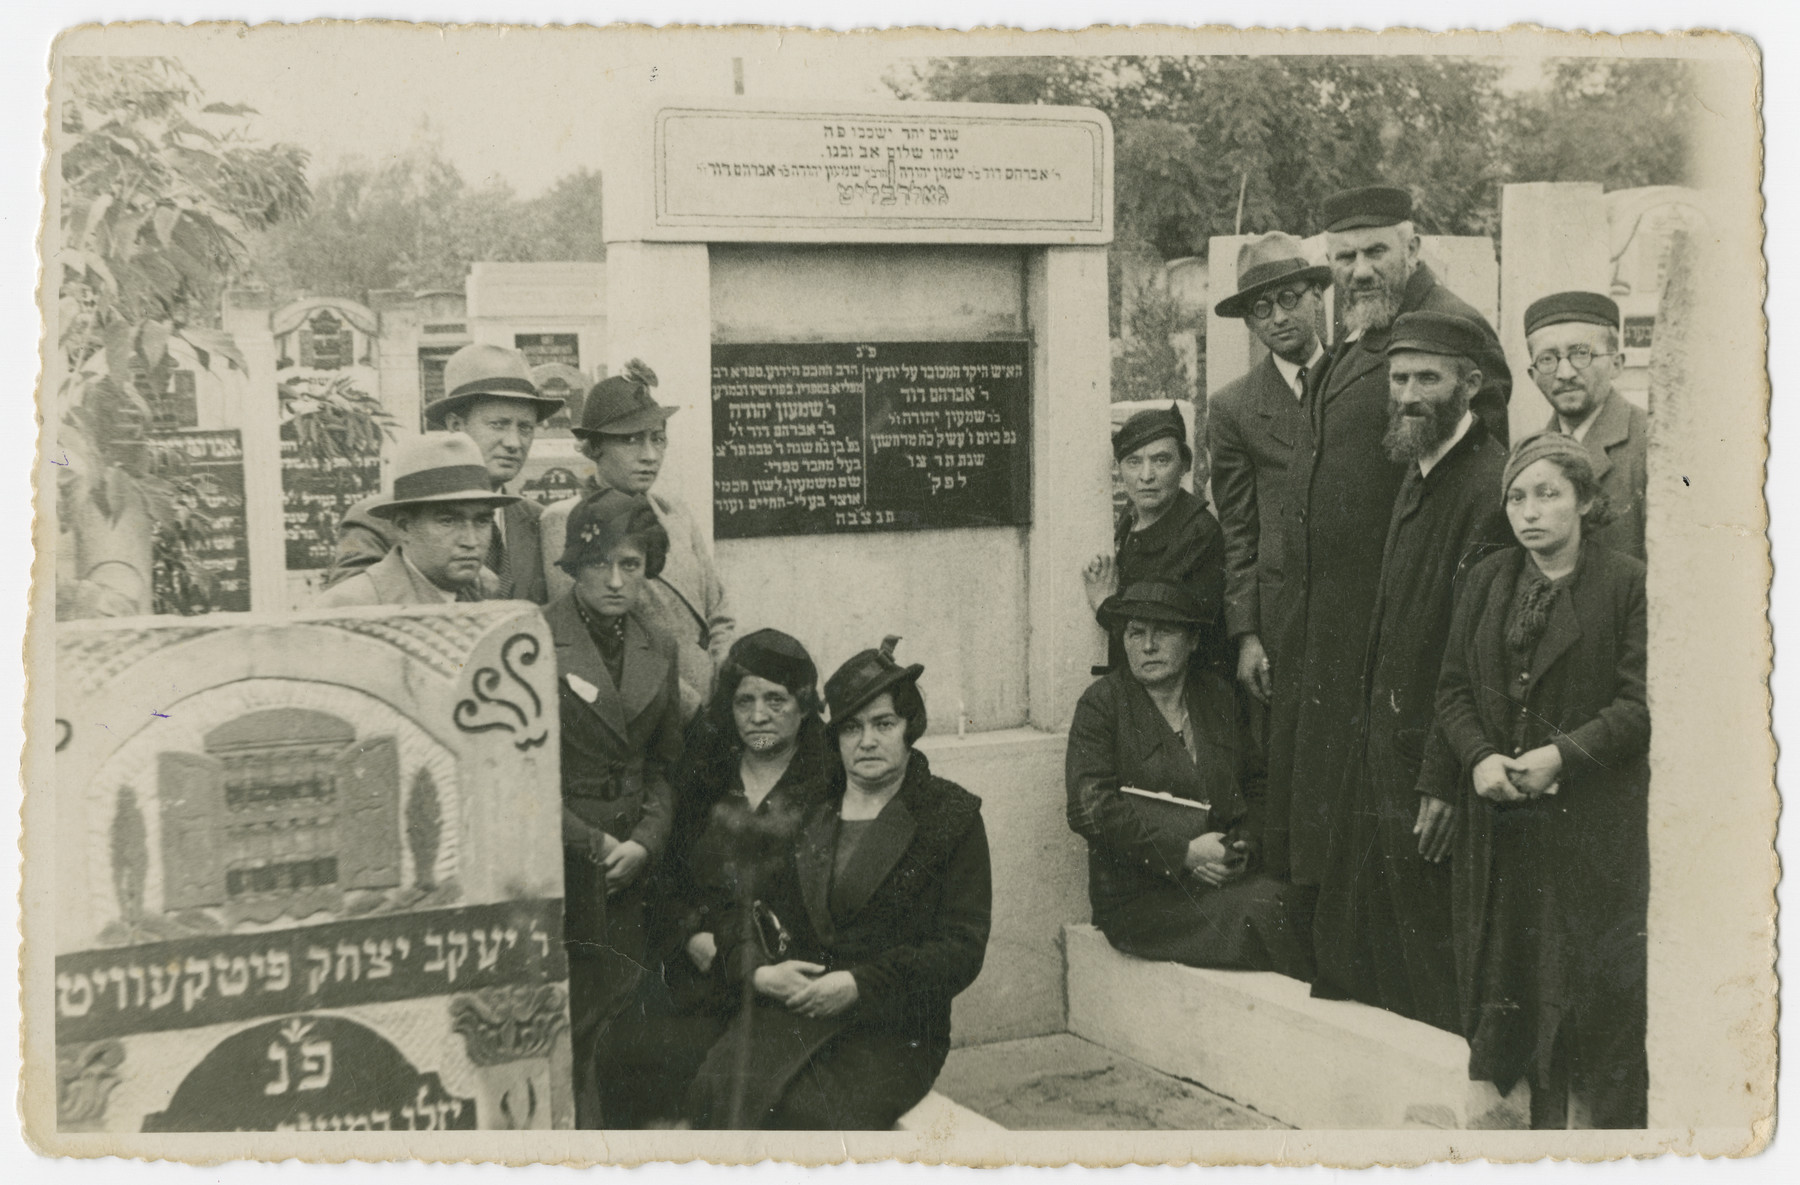 An extended Polish Jewish family gathers by a tombstone in the Jewish cemetery in Lodz.

Herschel Hudes (father of Lola Hudes Bielski), standing fourth from right and Necha Hudes (mother of Lola Hudes Bielski), seated first from left are pictured at the Lodz Cemetery shortly before the Holocaust.  All the people in the photo perished in the Holocaust.